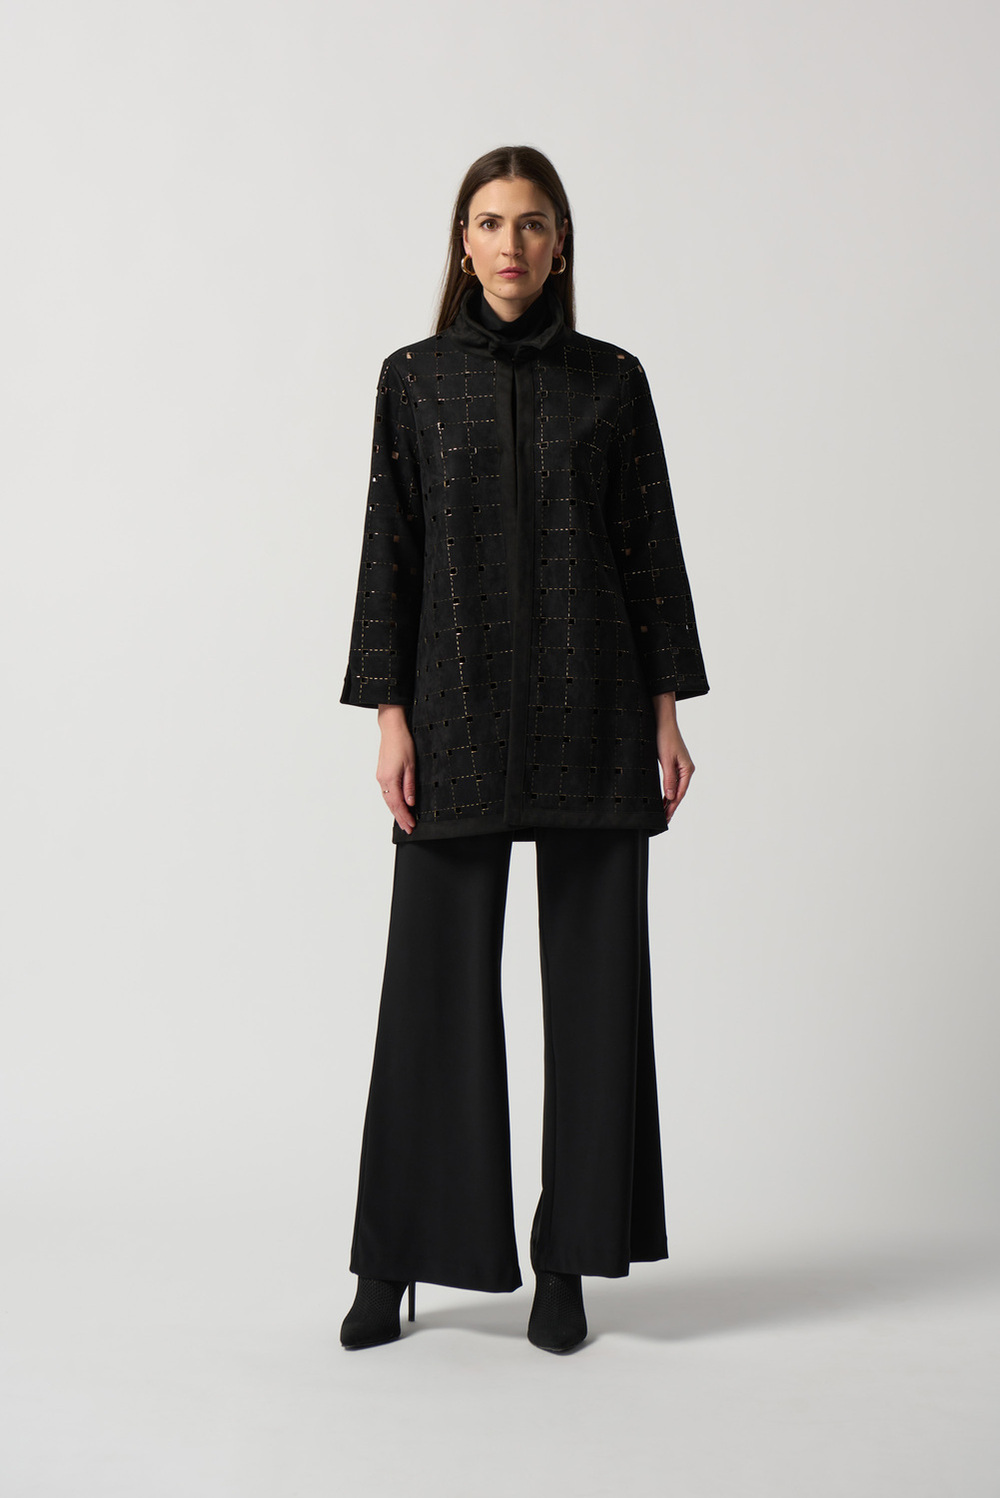 Perforated Long Jacket Style 233061. Black/gold